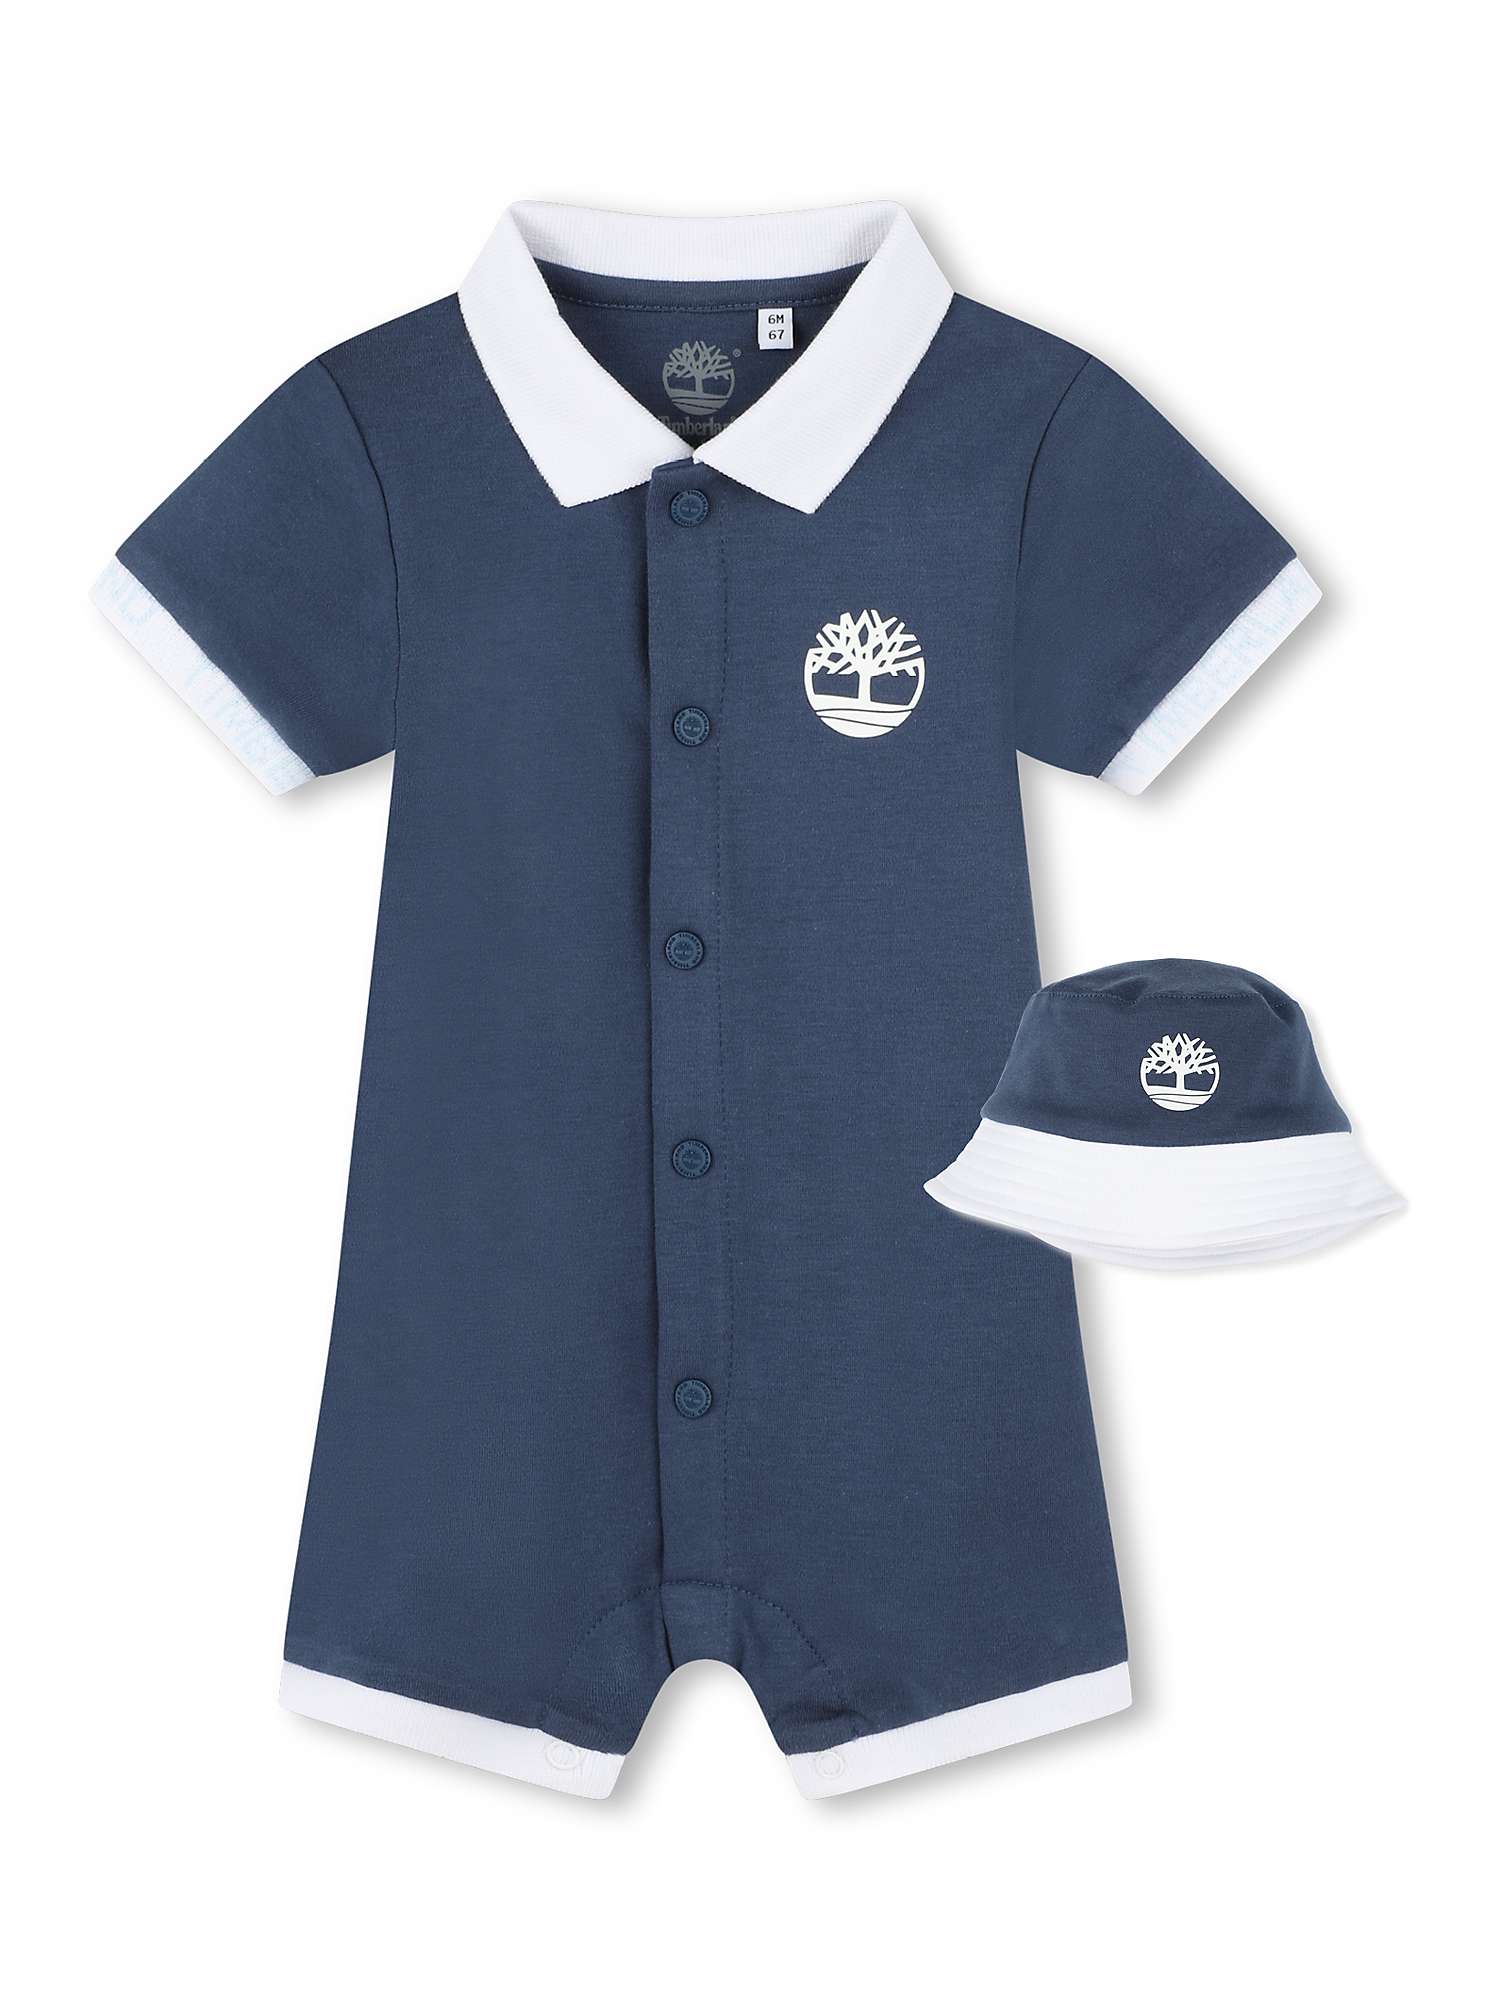 Buy Timberland Baby Overalls & Reversible Hat Set Online at johnlewis.com